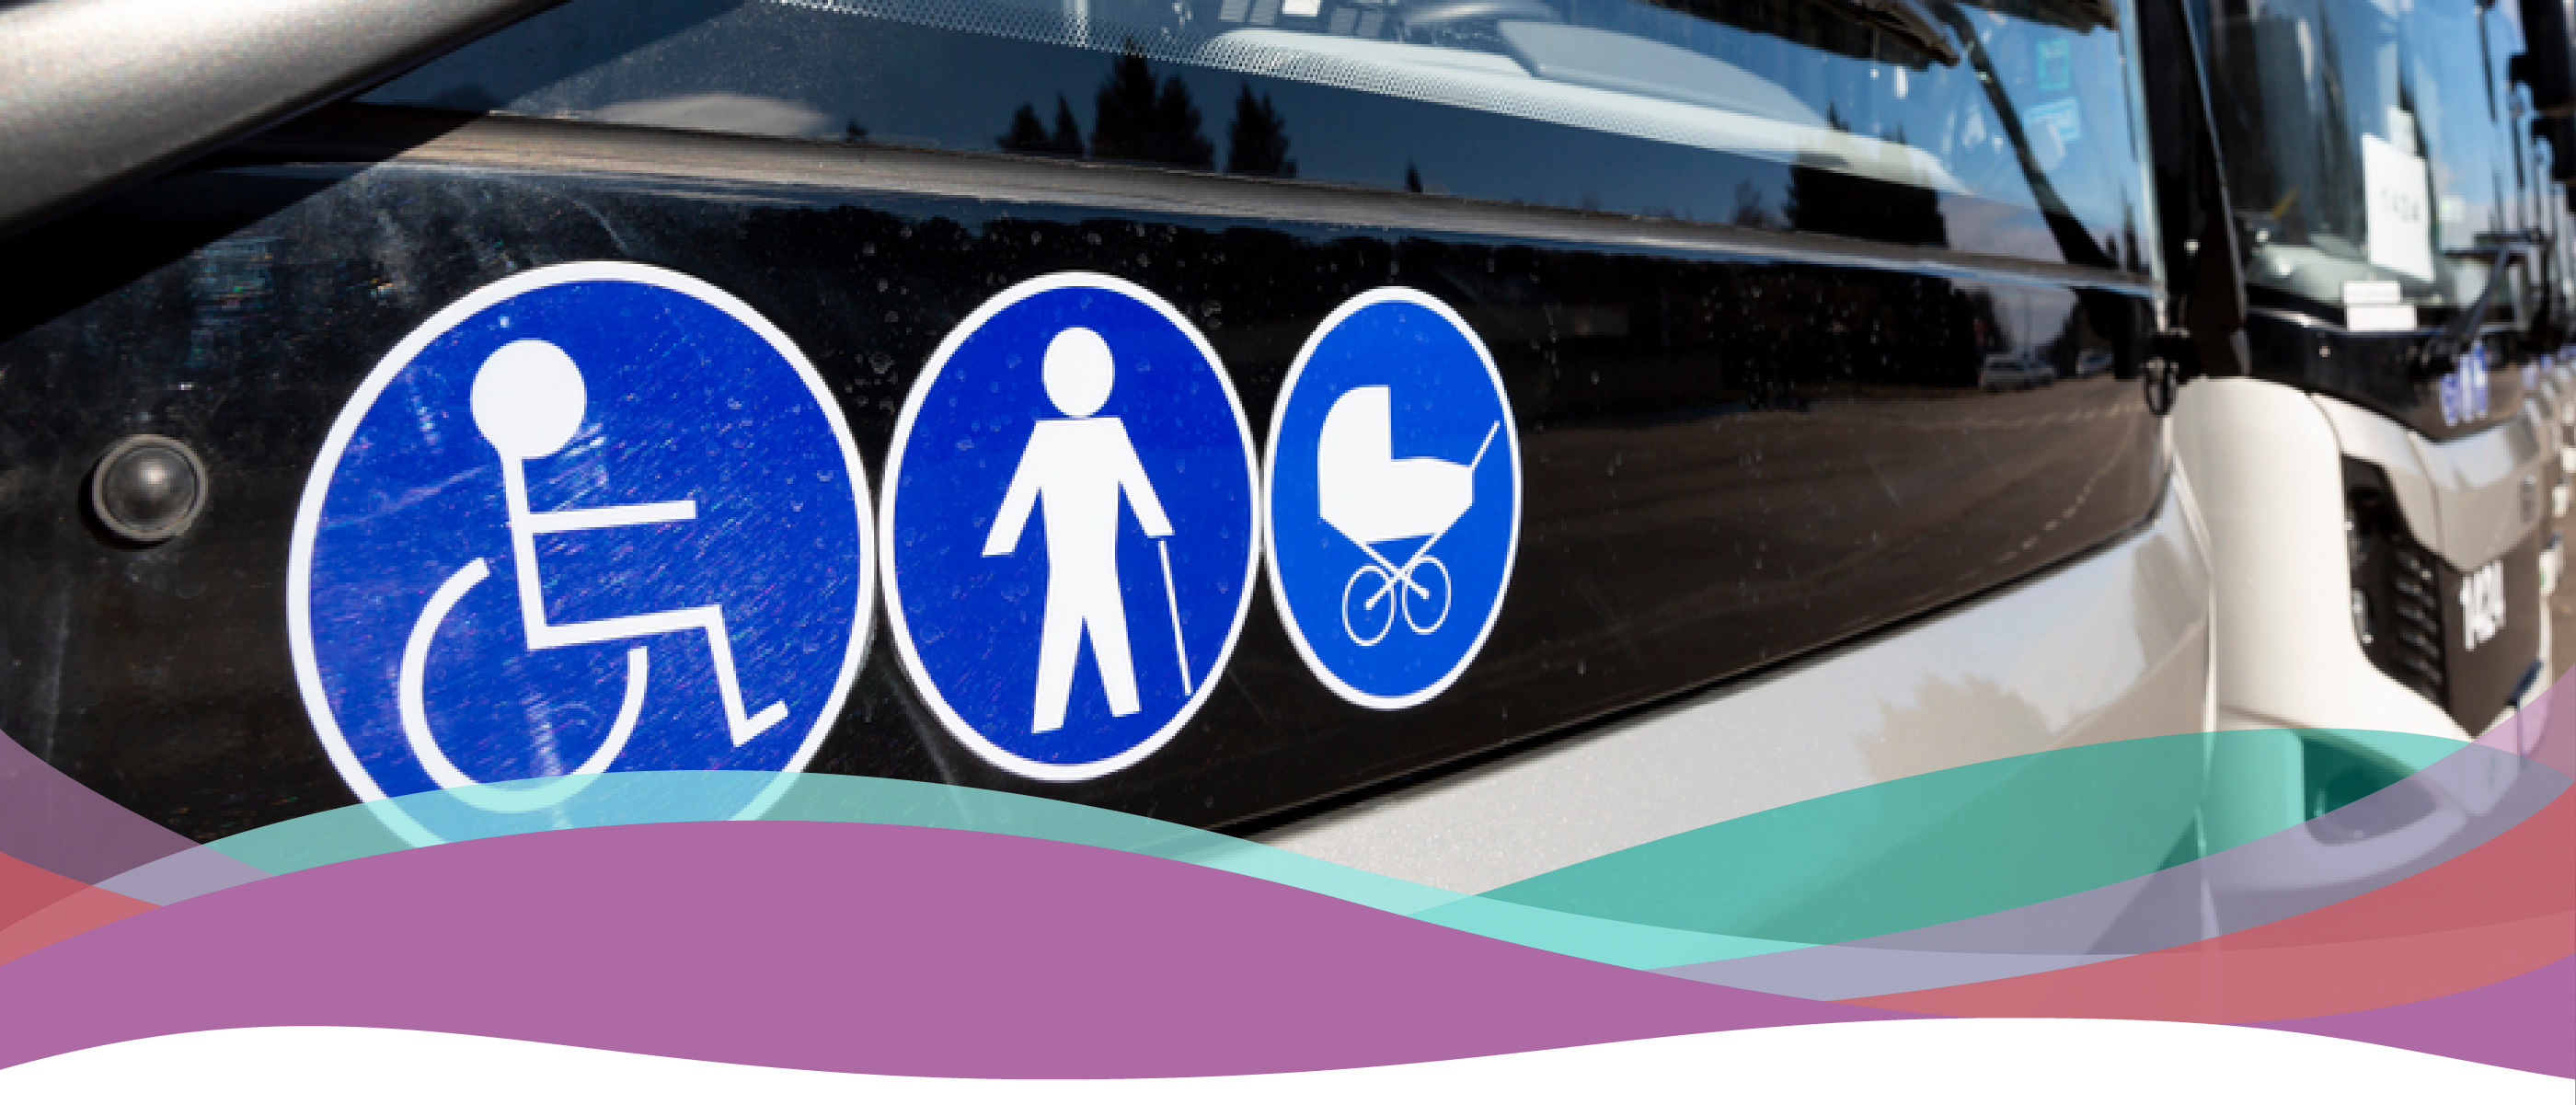 accessibility symbols on a city bus